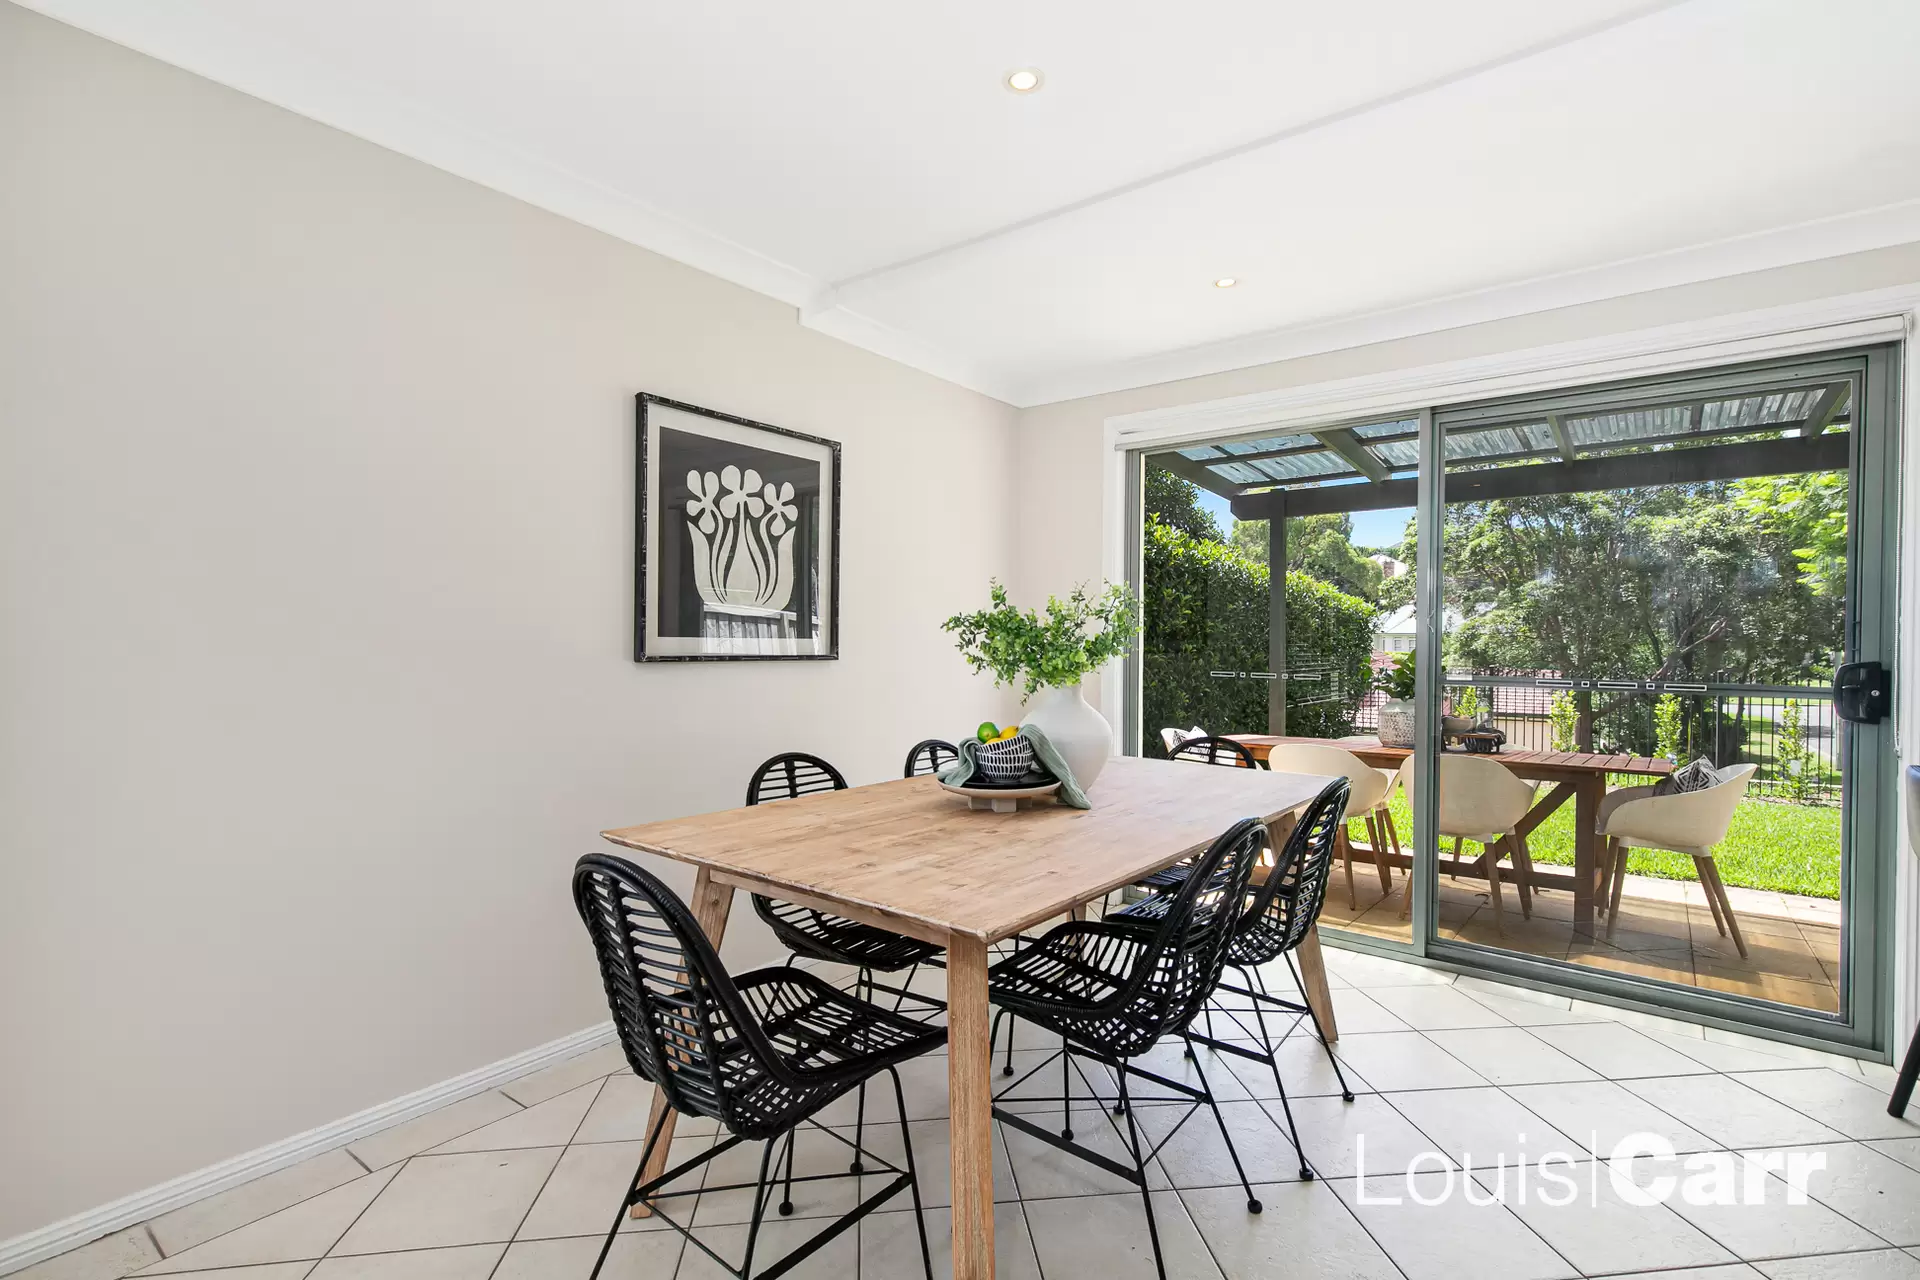 Photo #4: 12/33 Coonara Avenue, West Pennant Hills - Sold by Louis Carr Real Estate